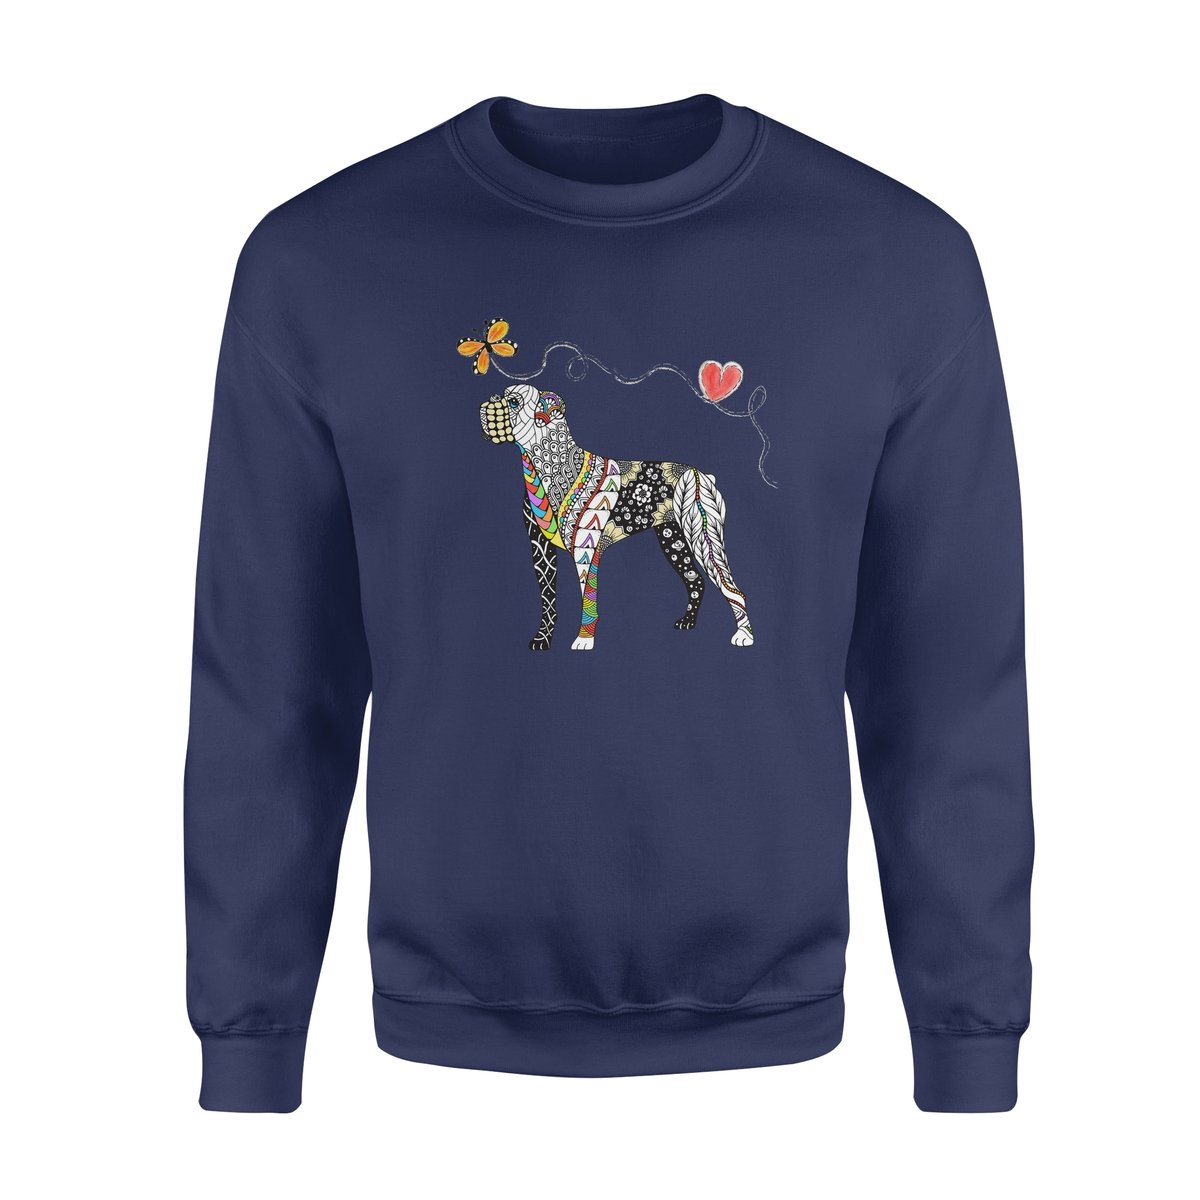 Zentangle Rainbow Boxer – Premium Crew Neck Sweatshirt, Gift For Dog Lover, Gift For Bull Terrier Lover T-Shirt Hoodie All Color Size S-5Xl